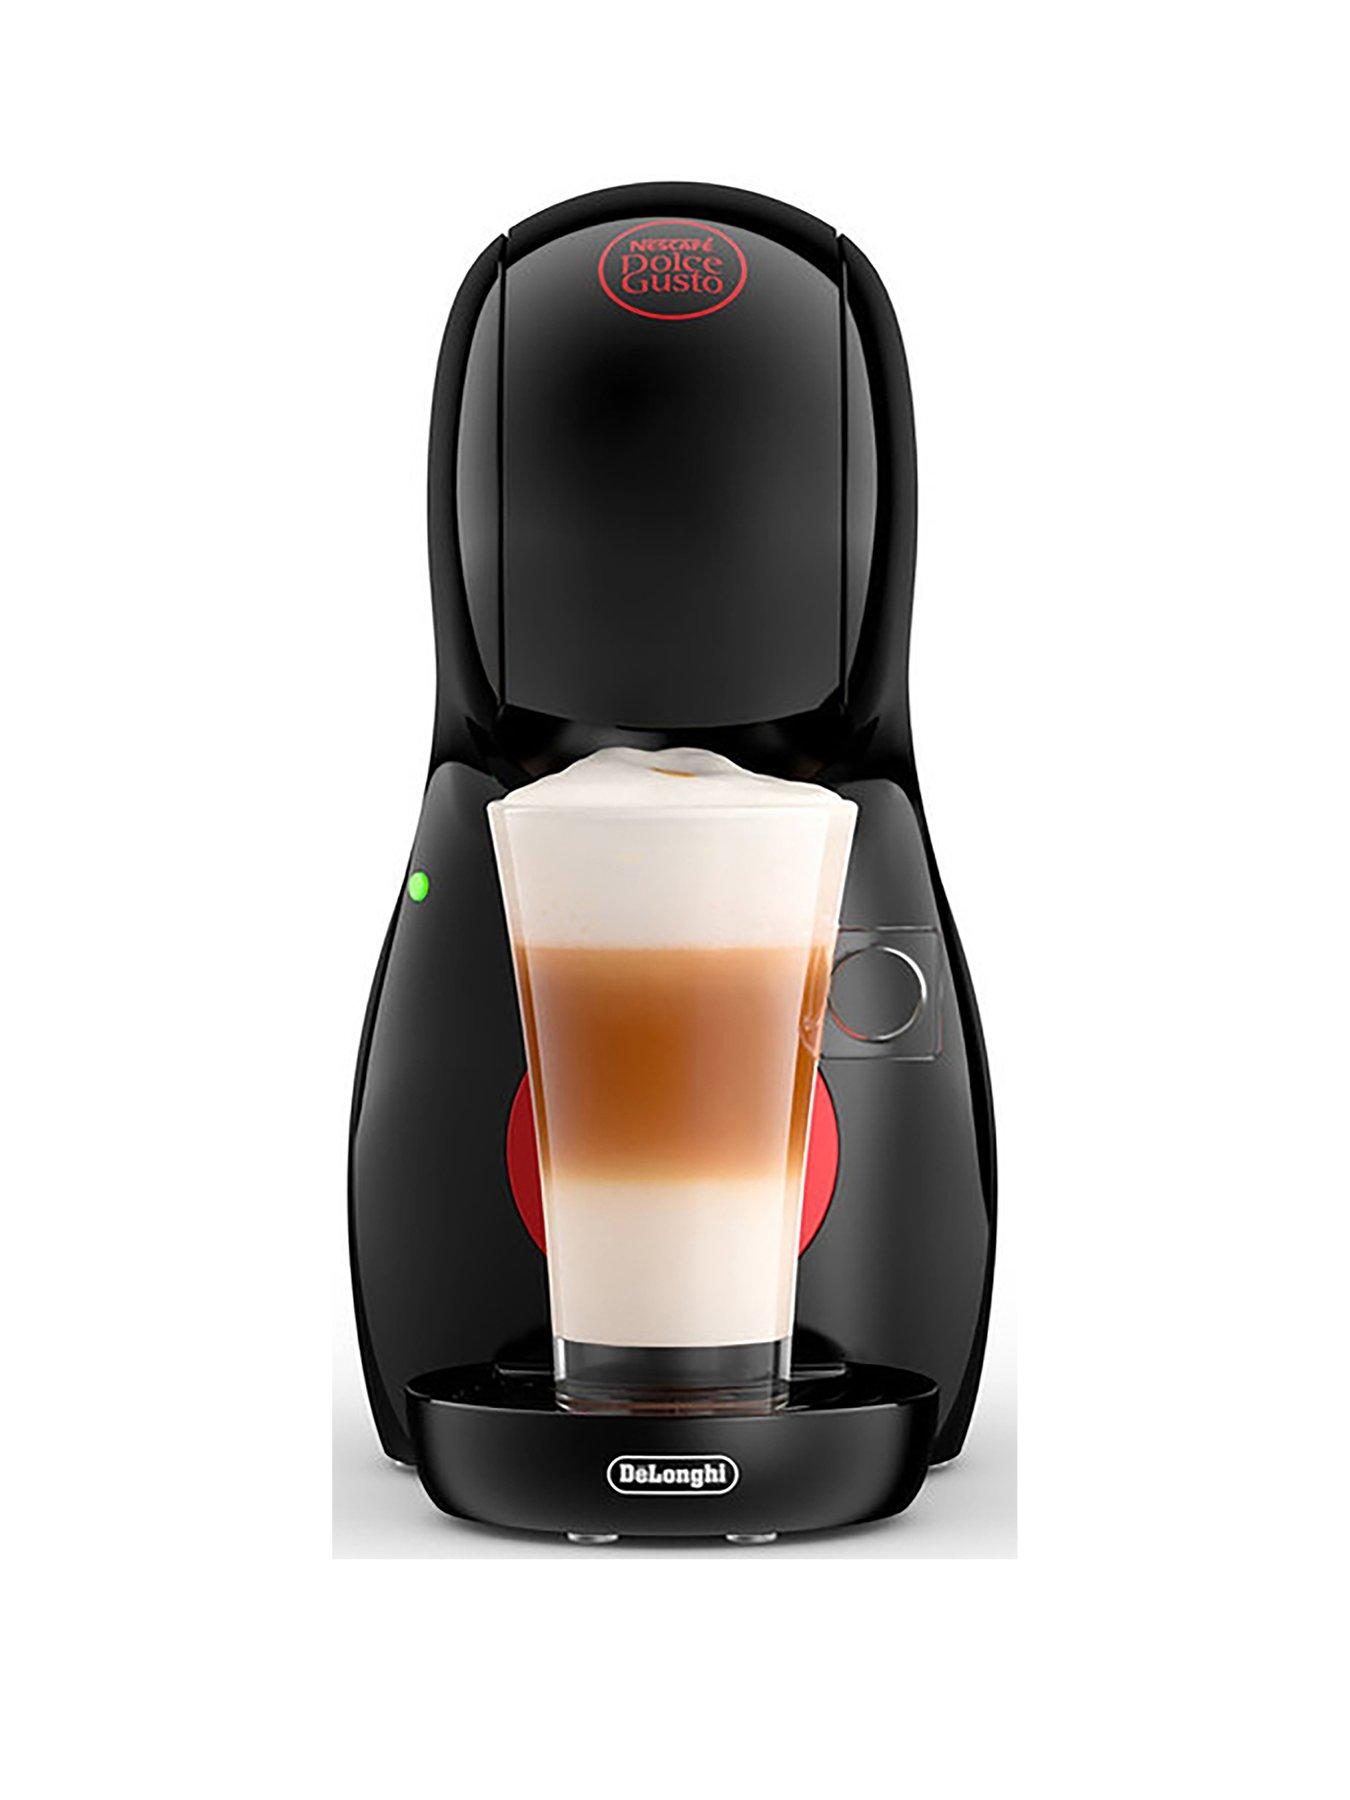 How to Use: Nescafe Dolce Gusto Coffee Machine by DeLonghi 